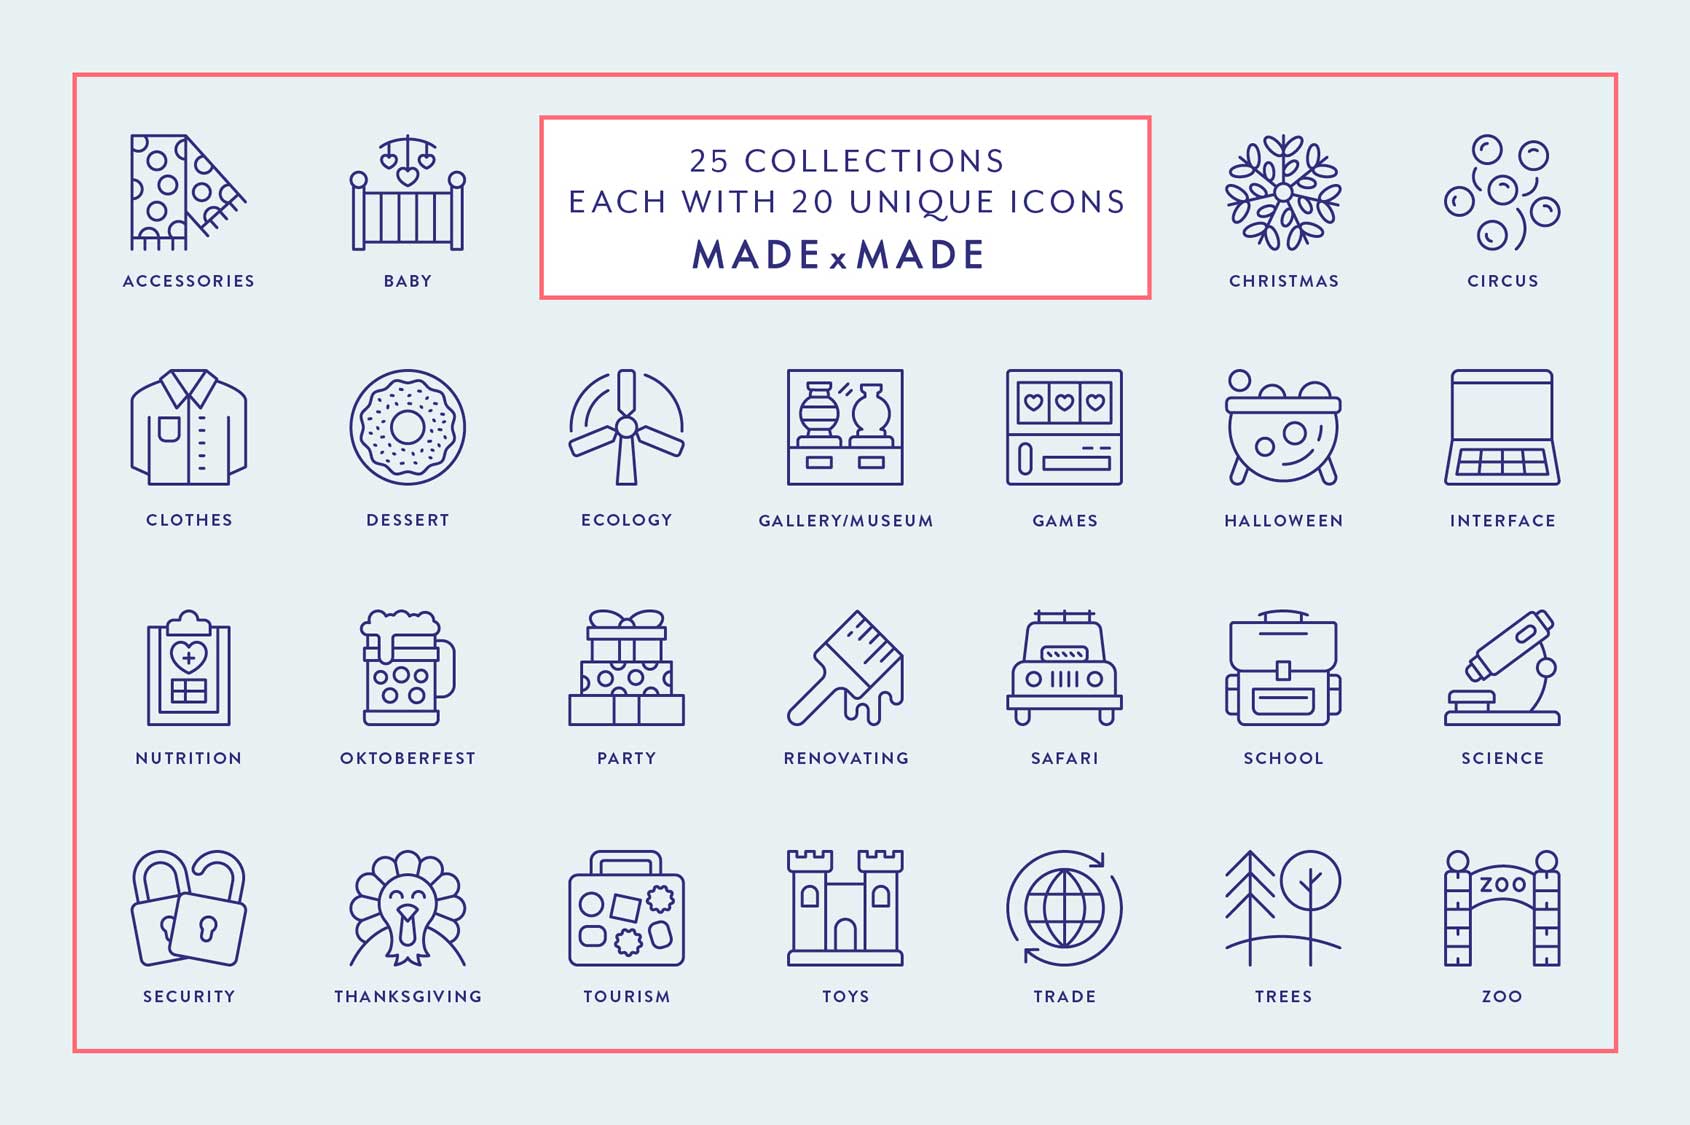 made x made icons – Mega Bundle Vol 5 – A consistent icon package of downloadable icons and symbols for 25 popular collections - collection overview